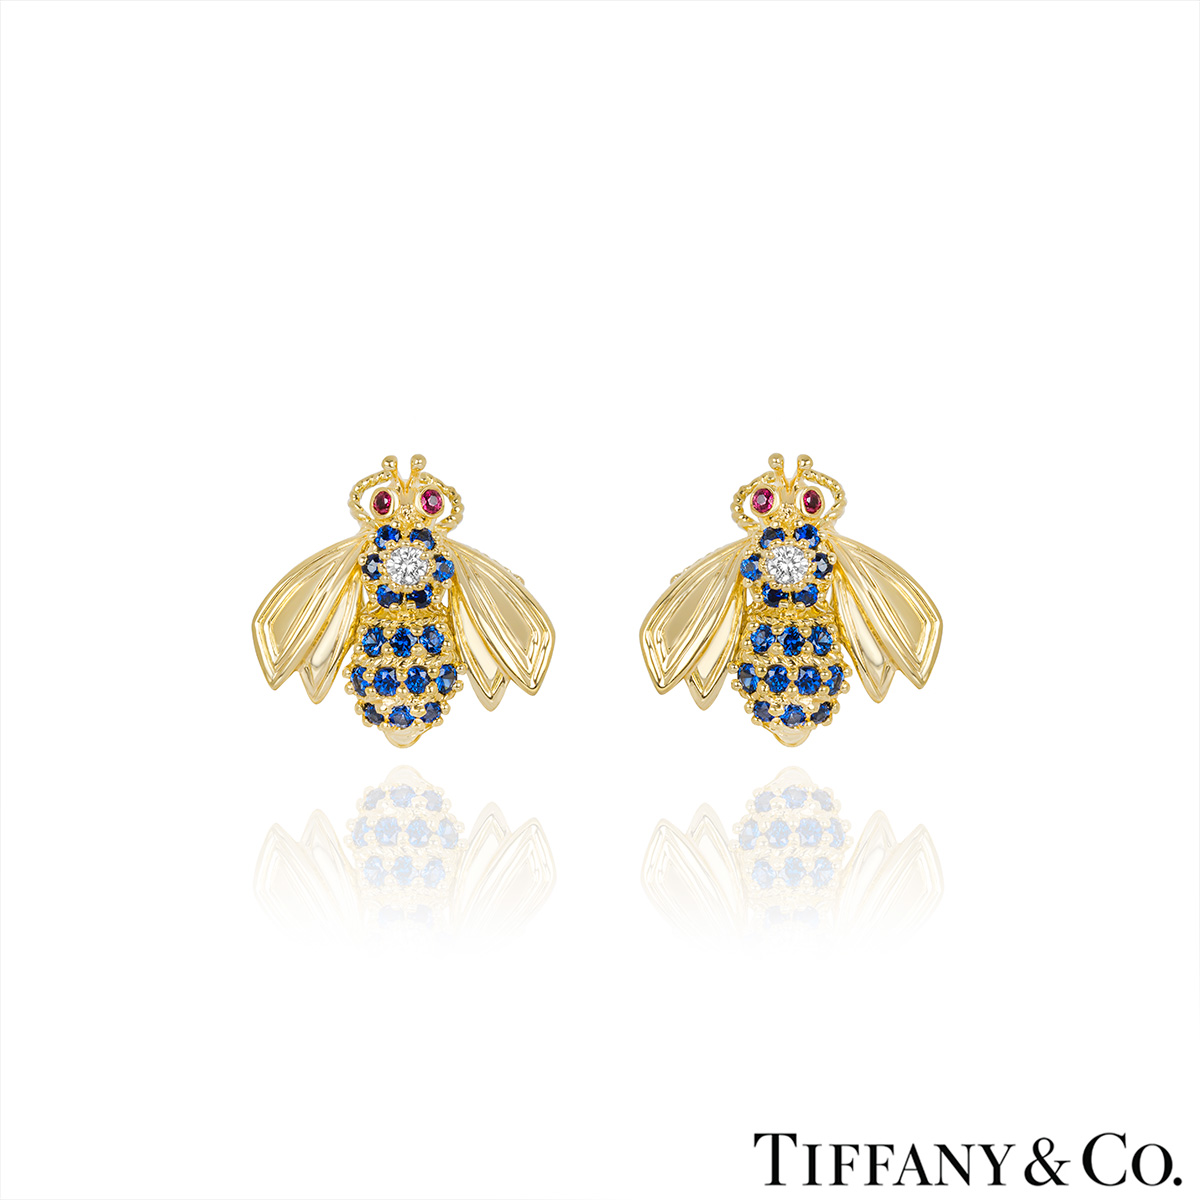 Tiffany & Co. Yellow Gold, Diamond, Sapphire and Ruby Bee Earrings